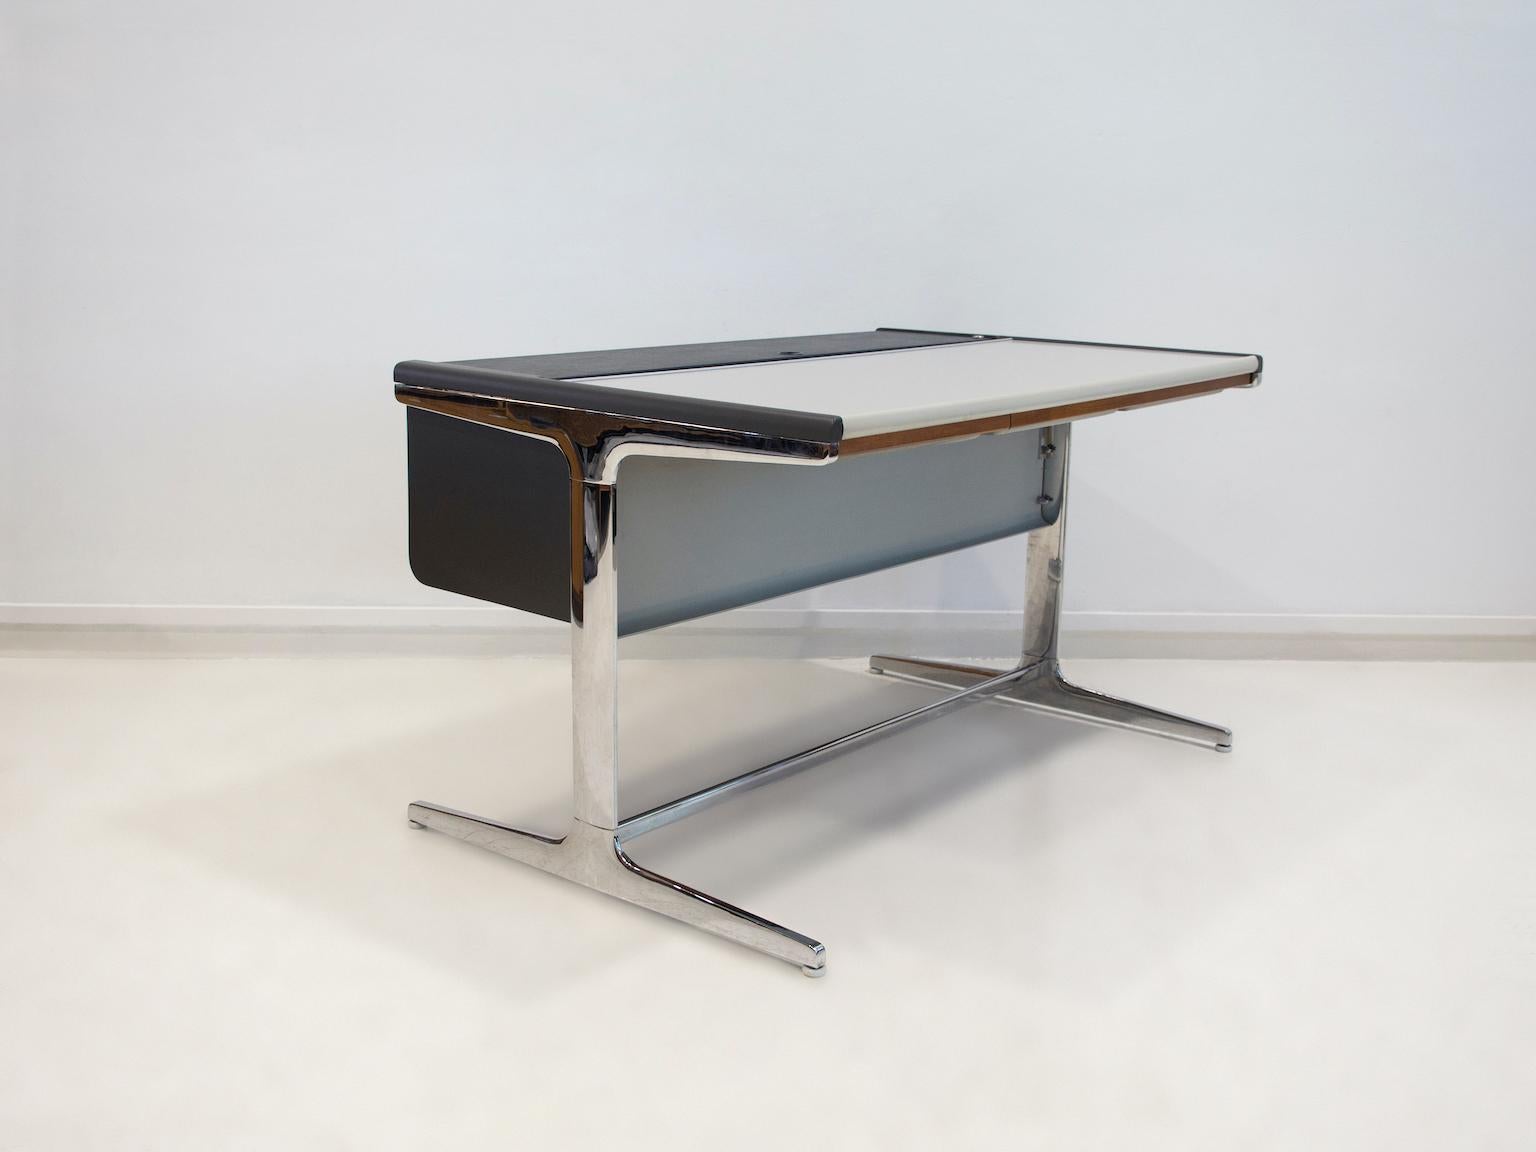 Action Office desk, model 64 902, designed by George Nelson & Robert Propst for Herman Miller from the 1960s. Base made of chrome-plated aluminum with white plastic protectors. Lockable hinged cover with a black synthetic leather coating and a gray